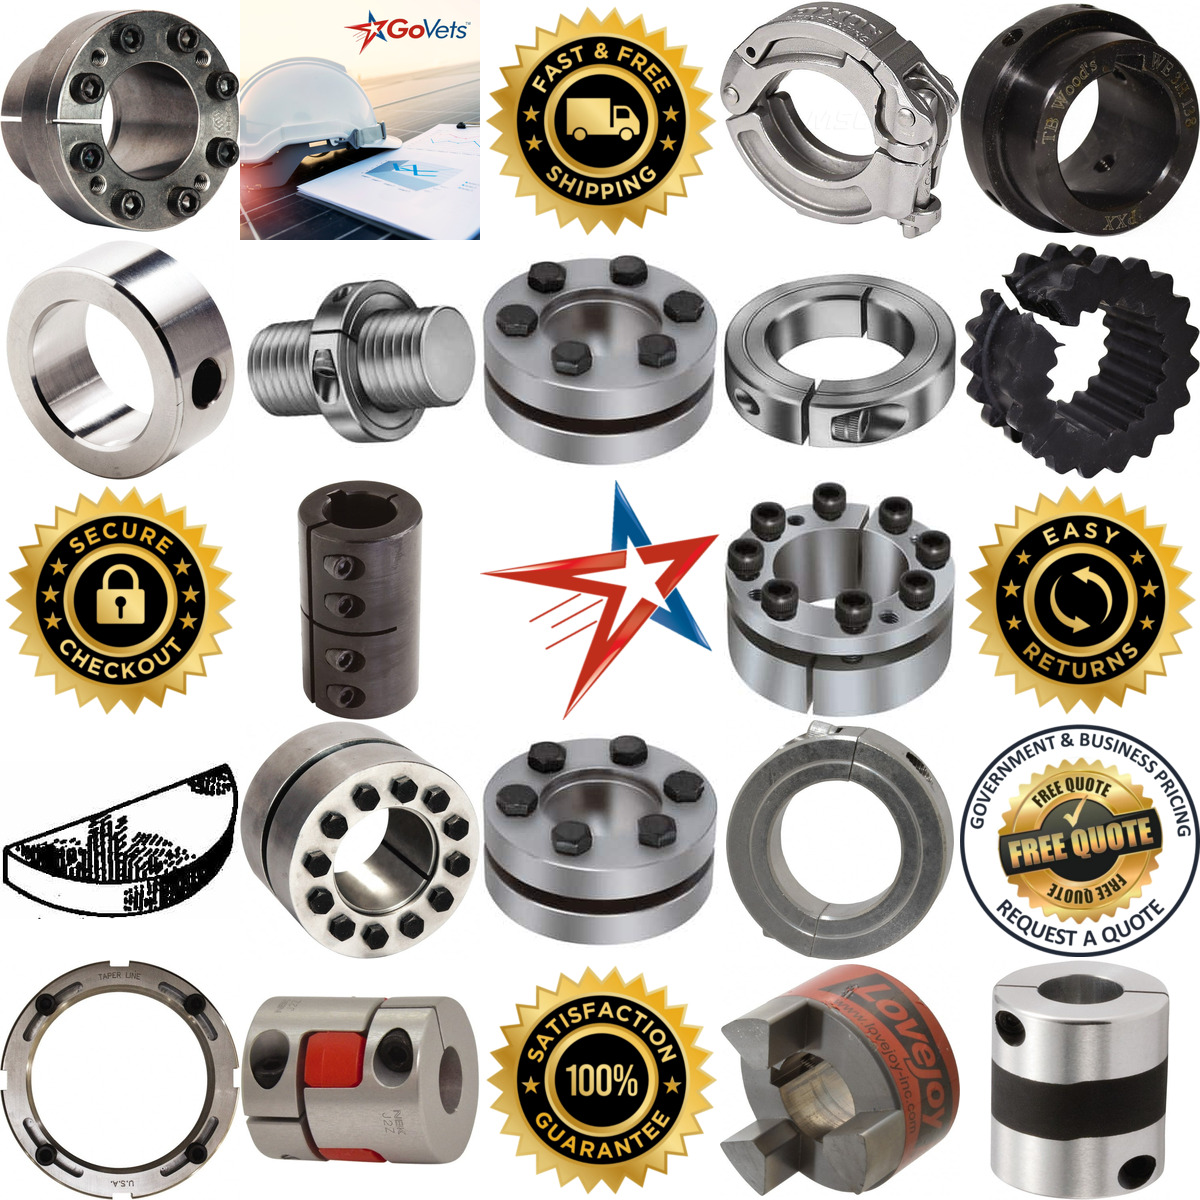 A selection of Shaft Collars Couplings Mounts and Keys products on GoVets